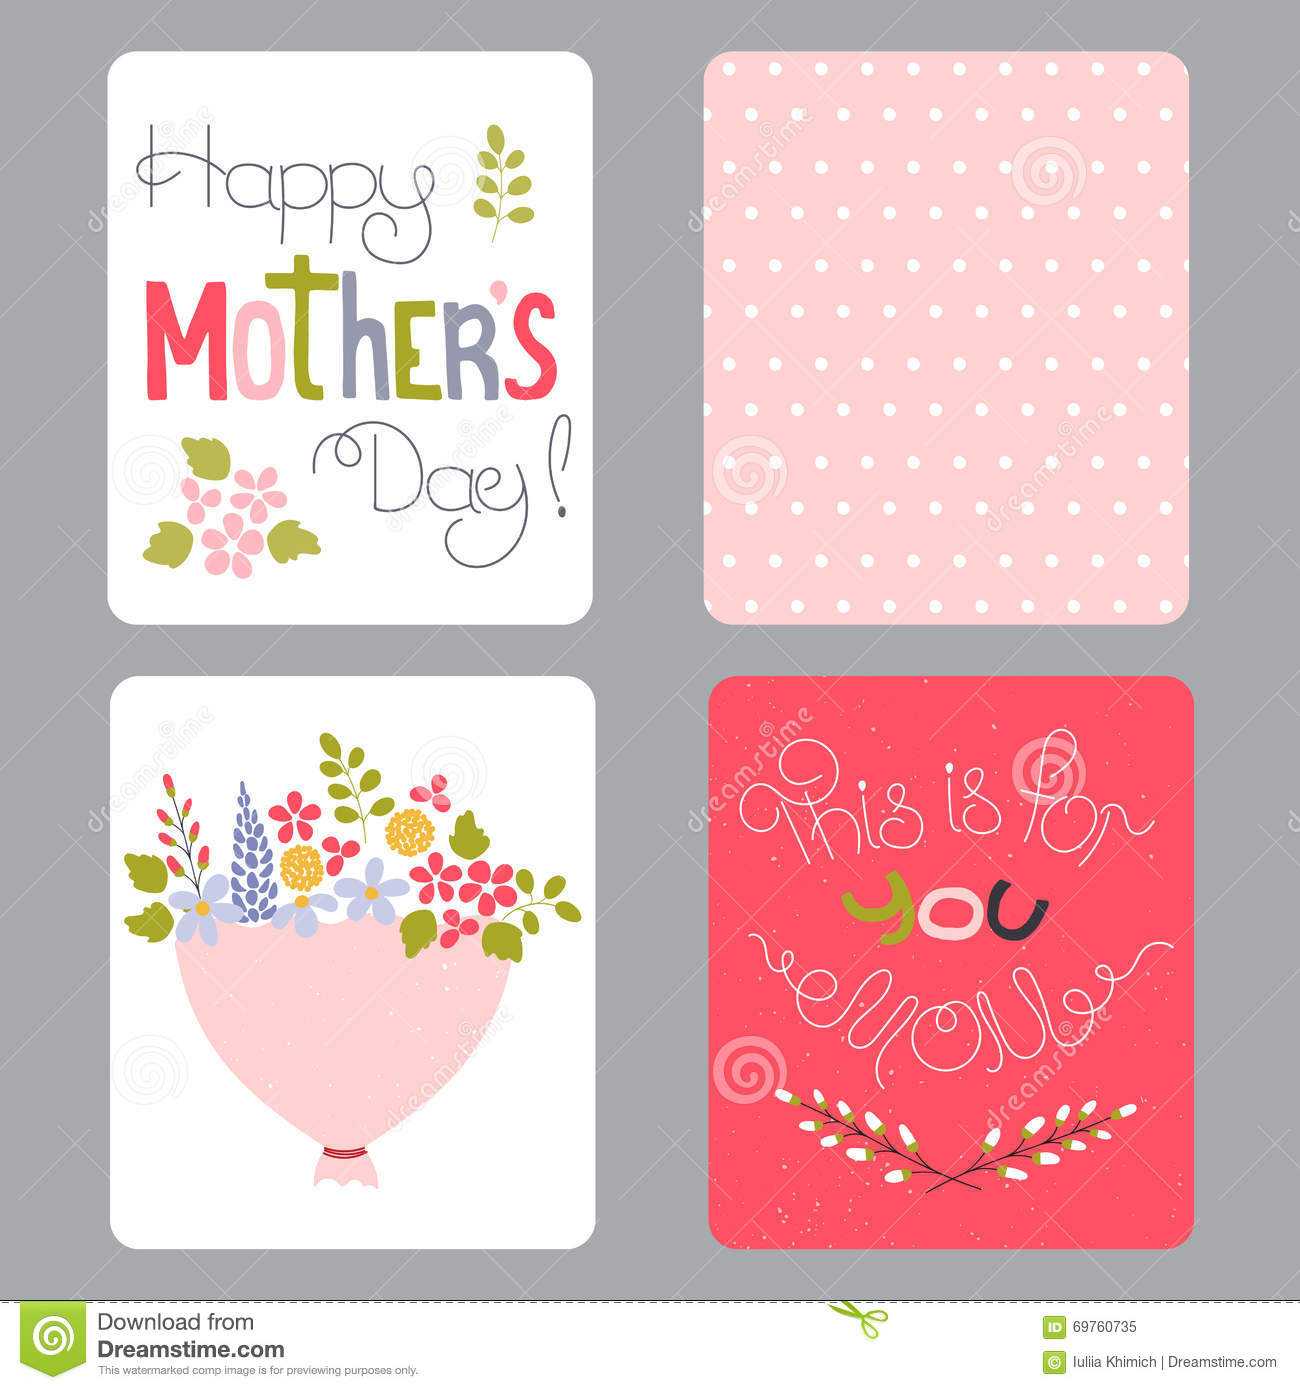 Mothers Day Set Of Cards Stock Vector. Illustration Of Party For Mothers Day Card Templates